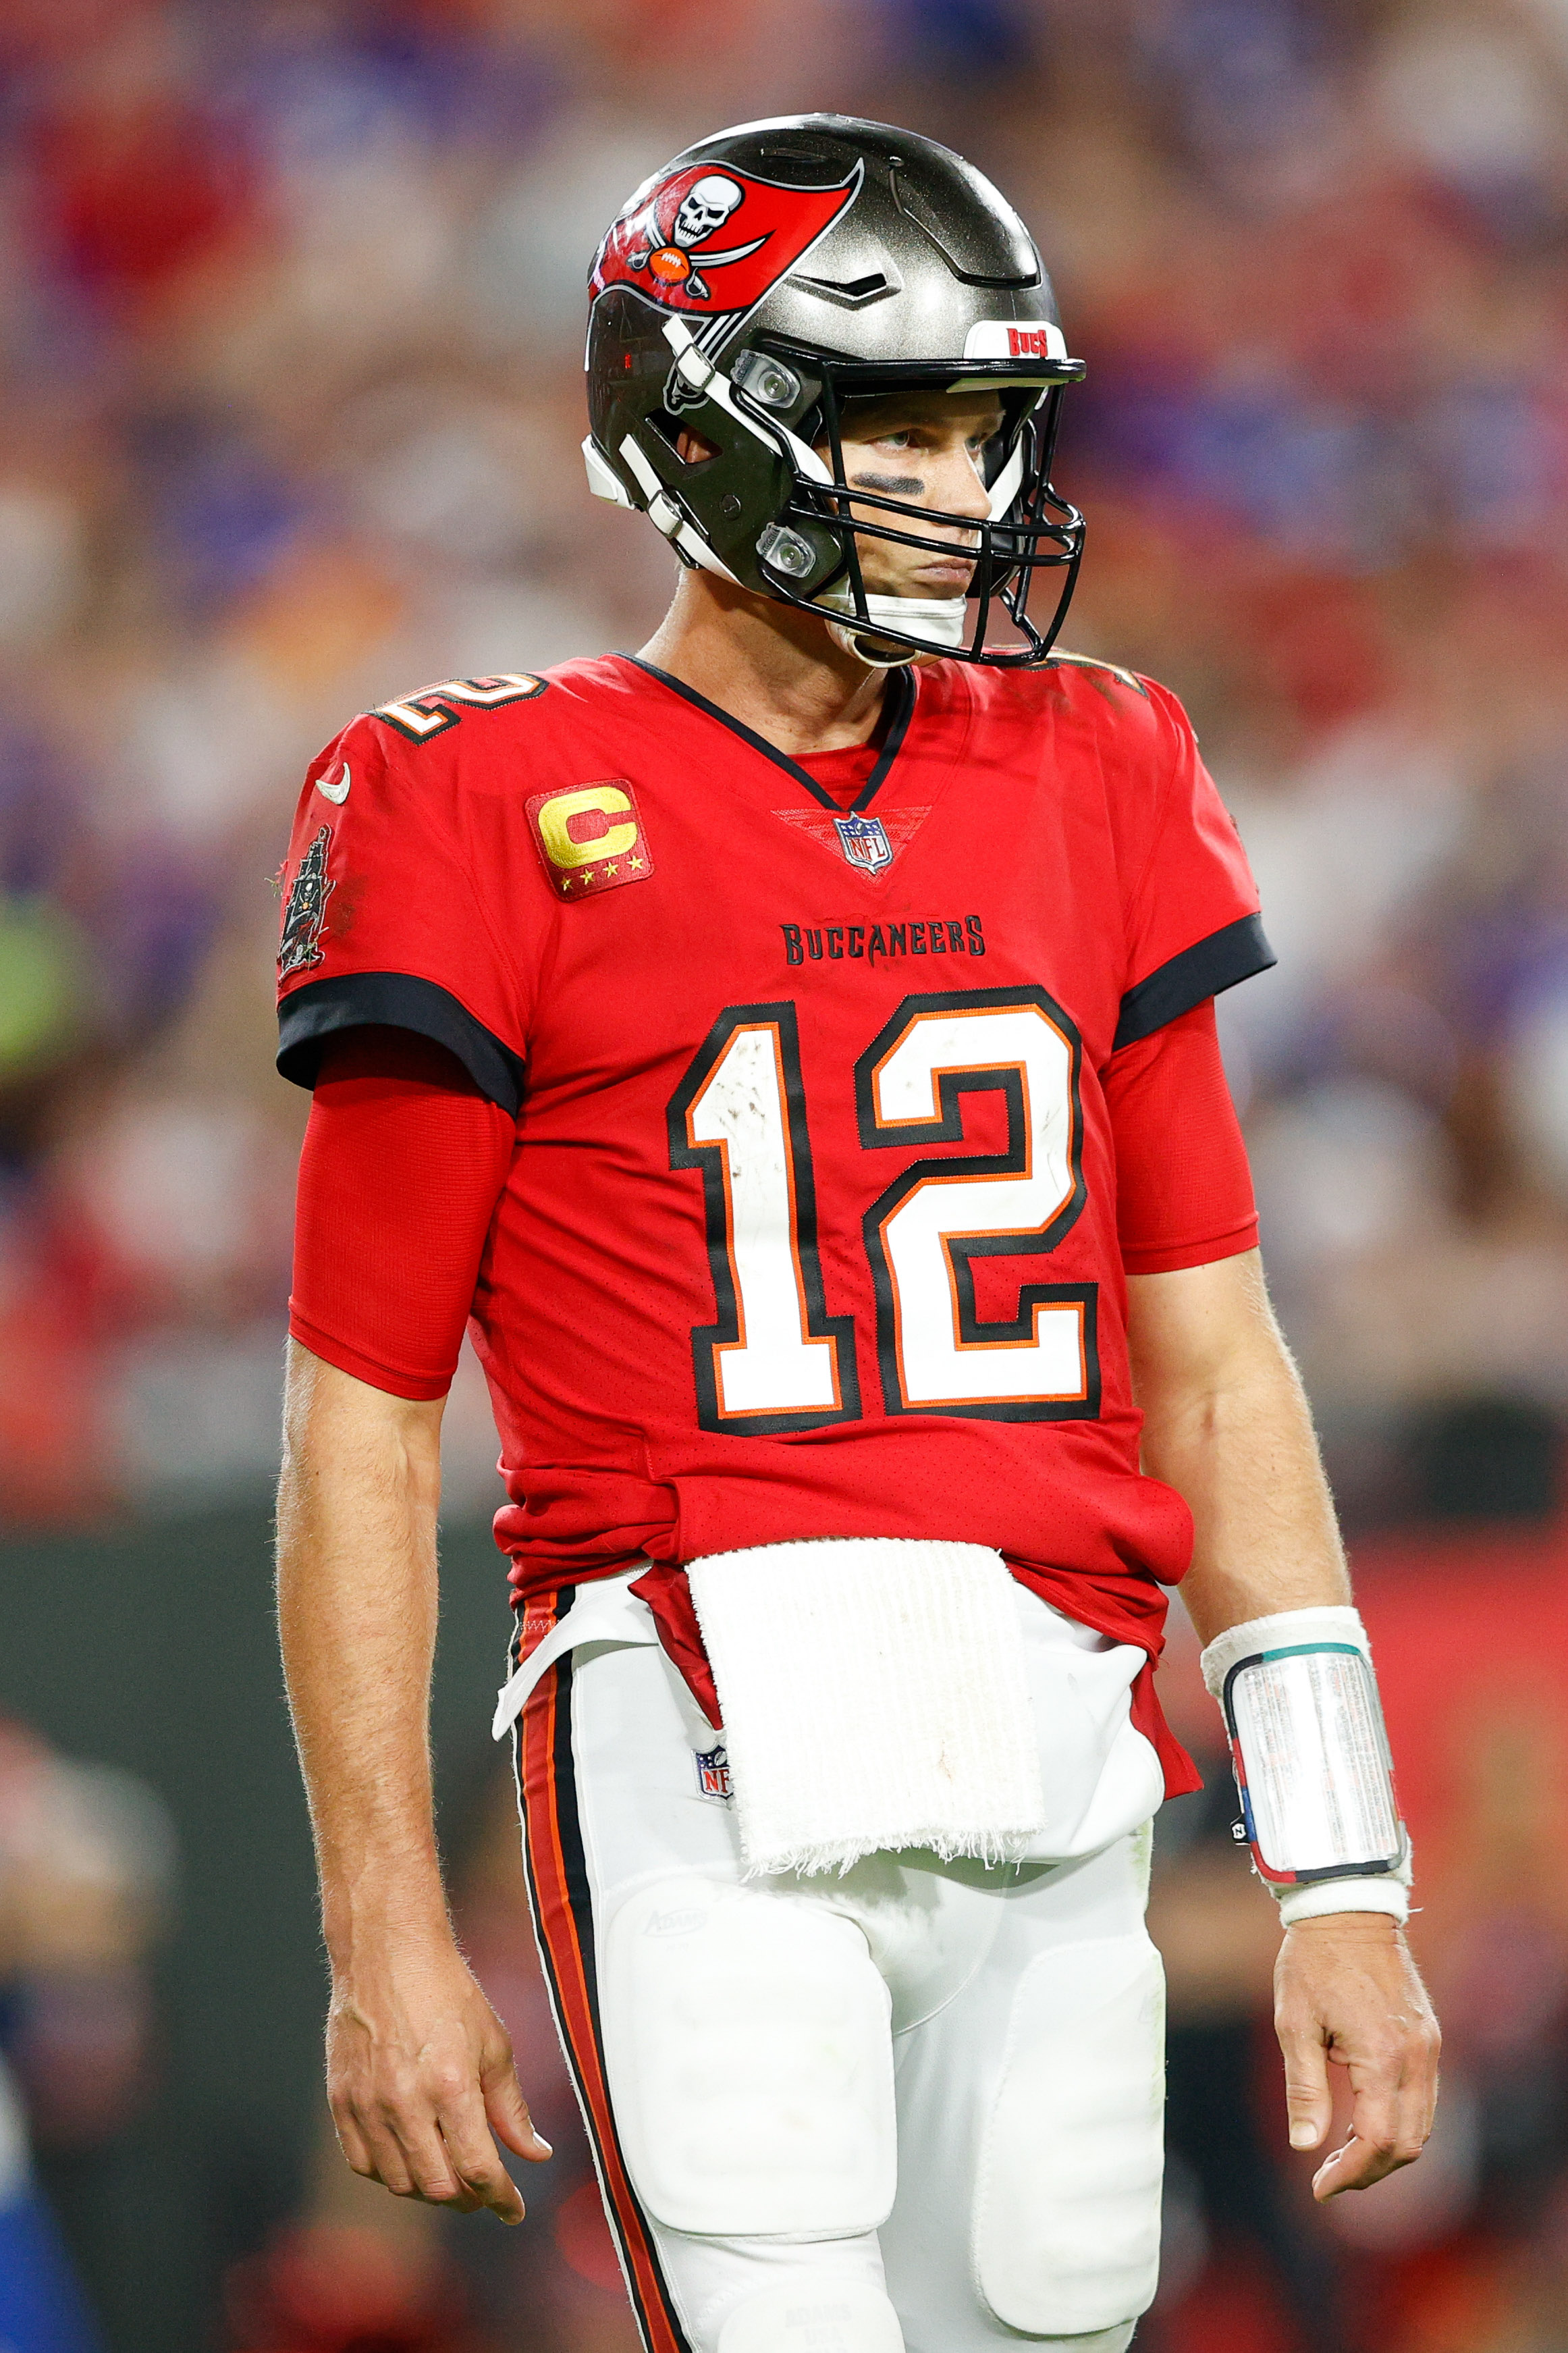 IMAGES: Legendary Quarterback Tom Brady Dons Tampa Bay Buccaneers Uniform  for the First Time - Space Coast Daily